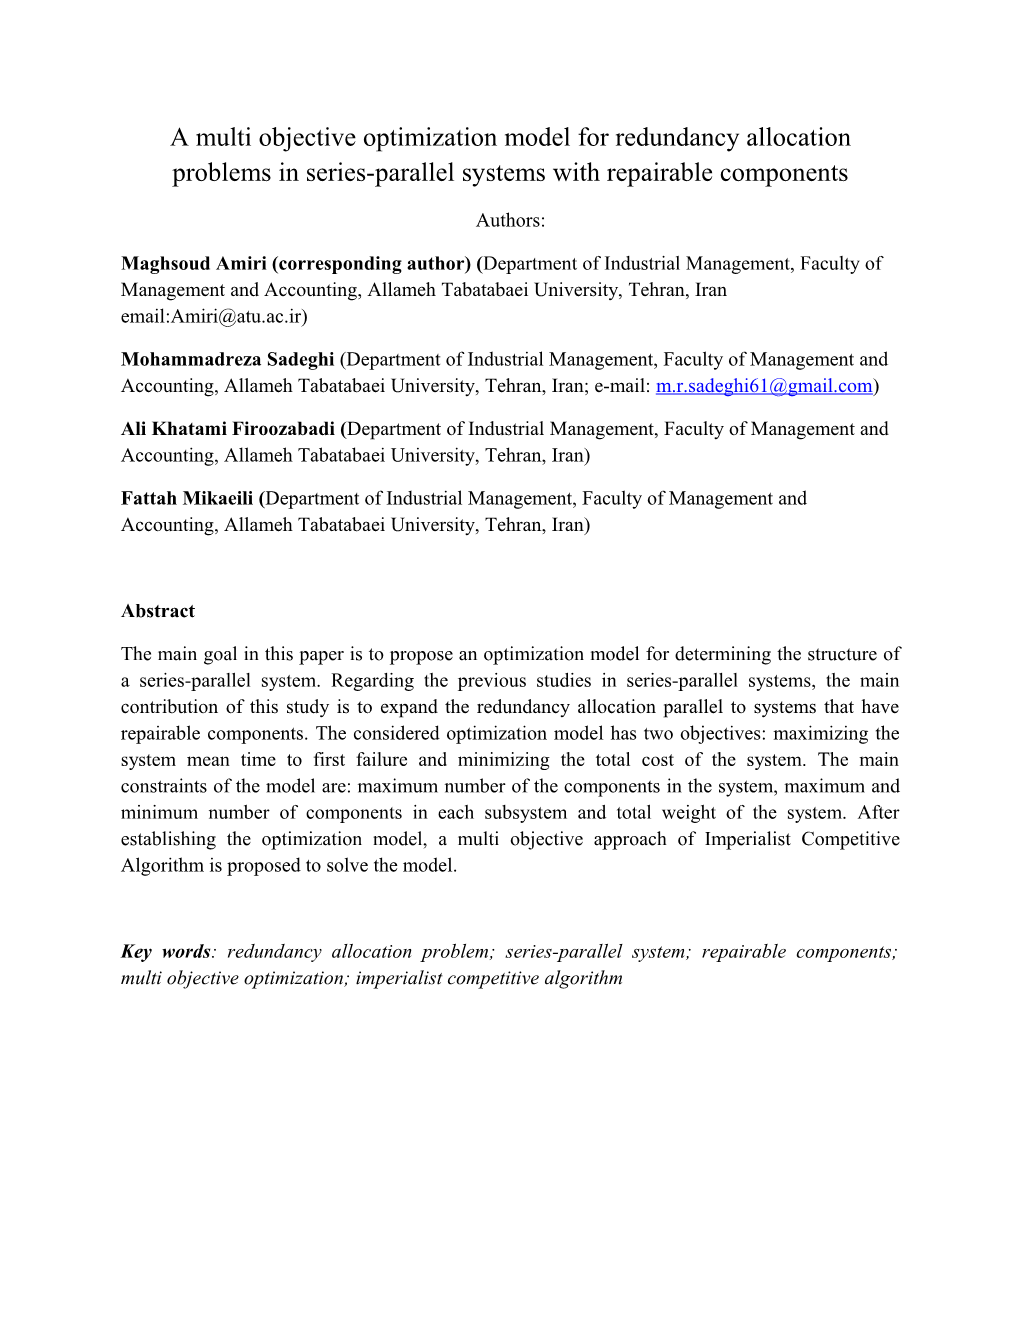 A Multi Objective Optimization Model for Redundancy Allocation Problems in Series-Parallel